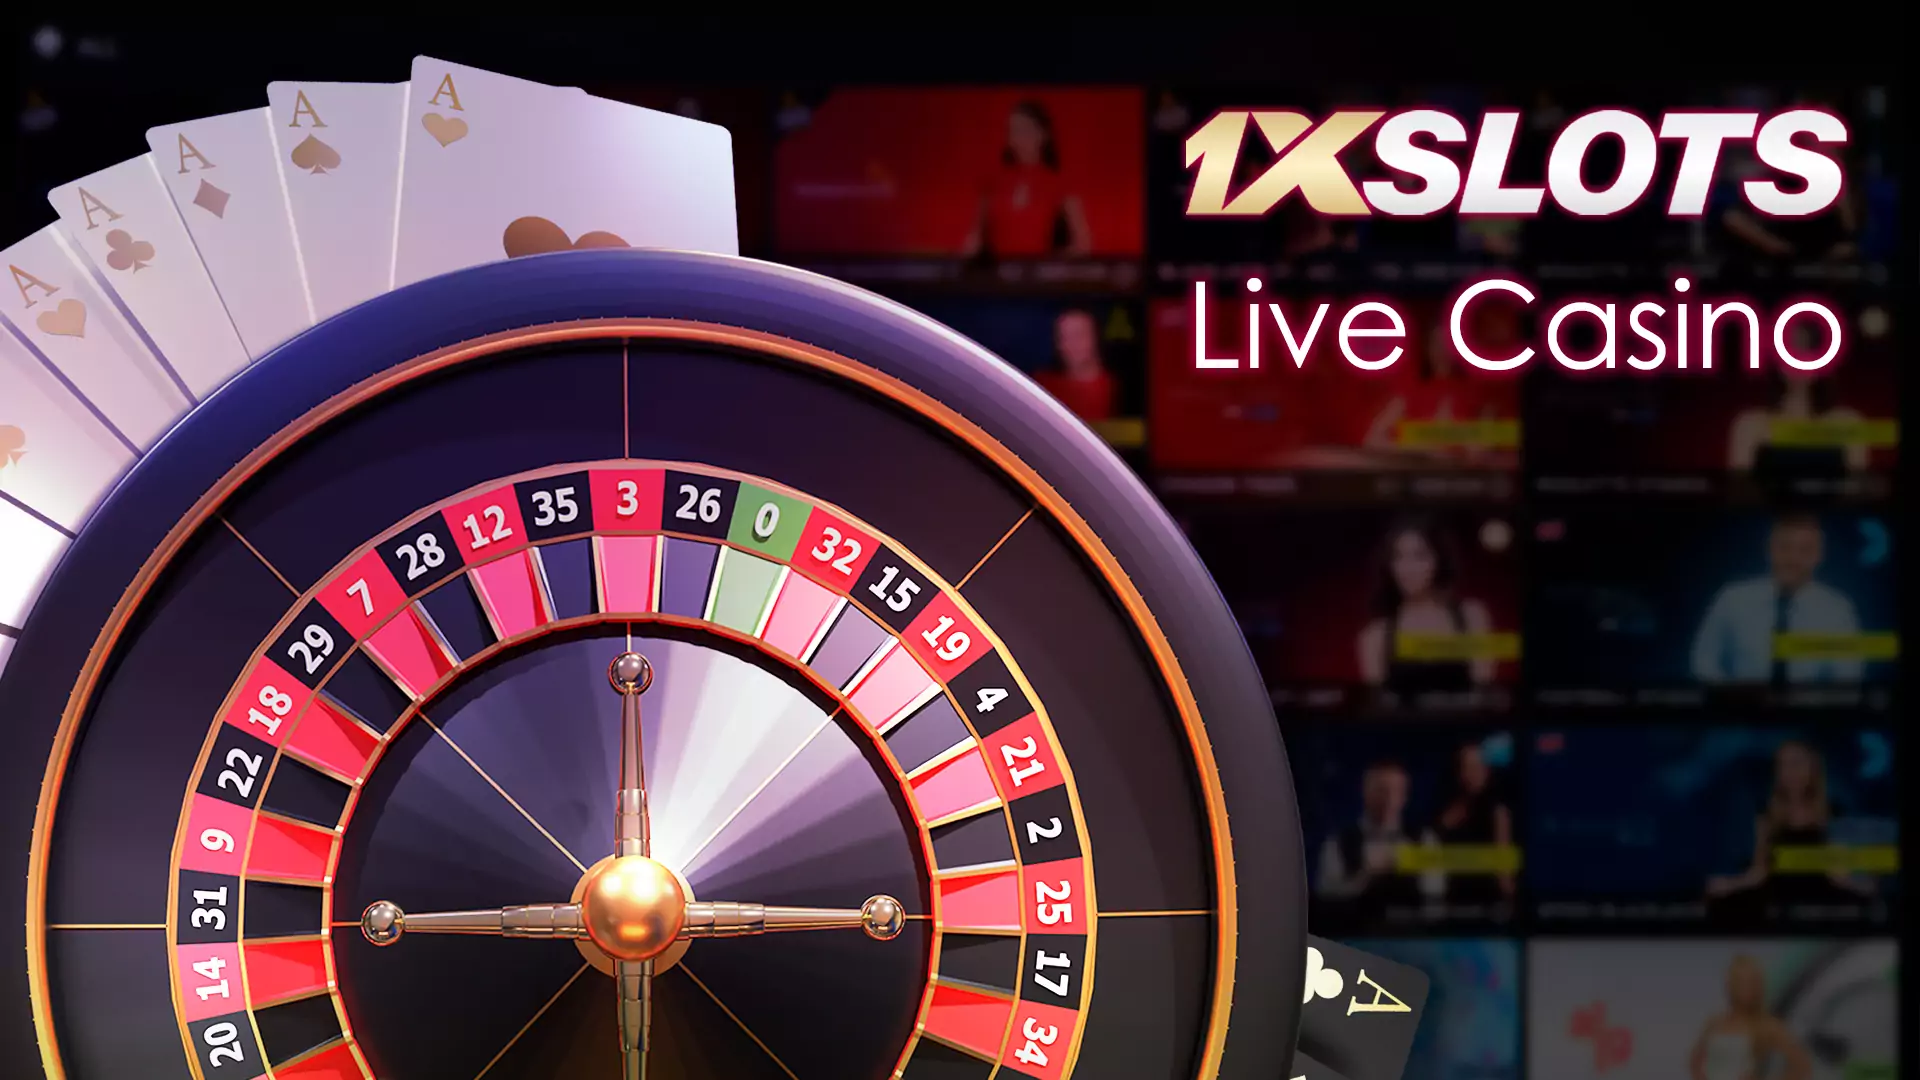 In the Live Casino, you can play with a real dealer online.